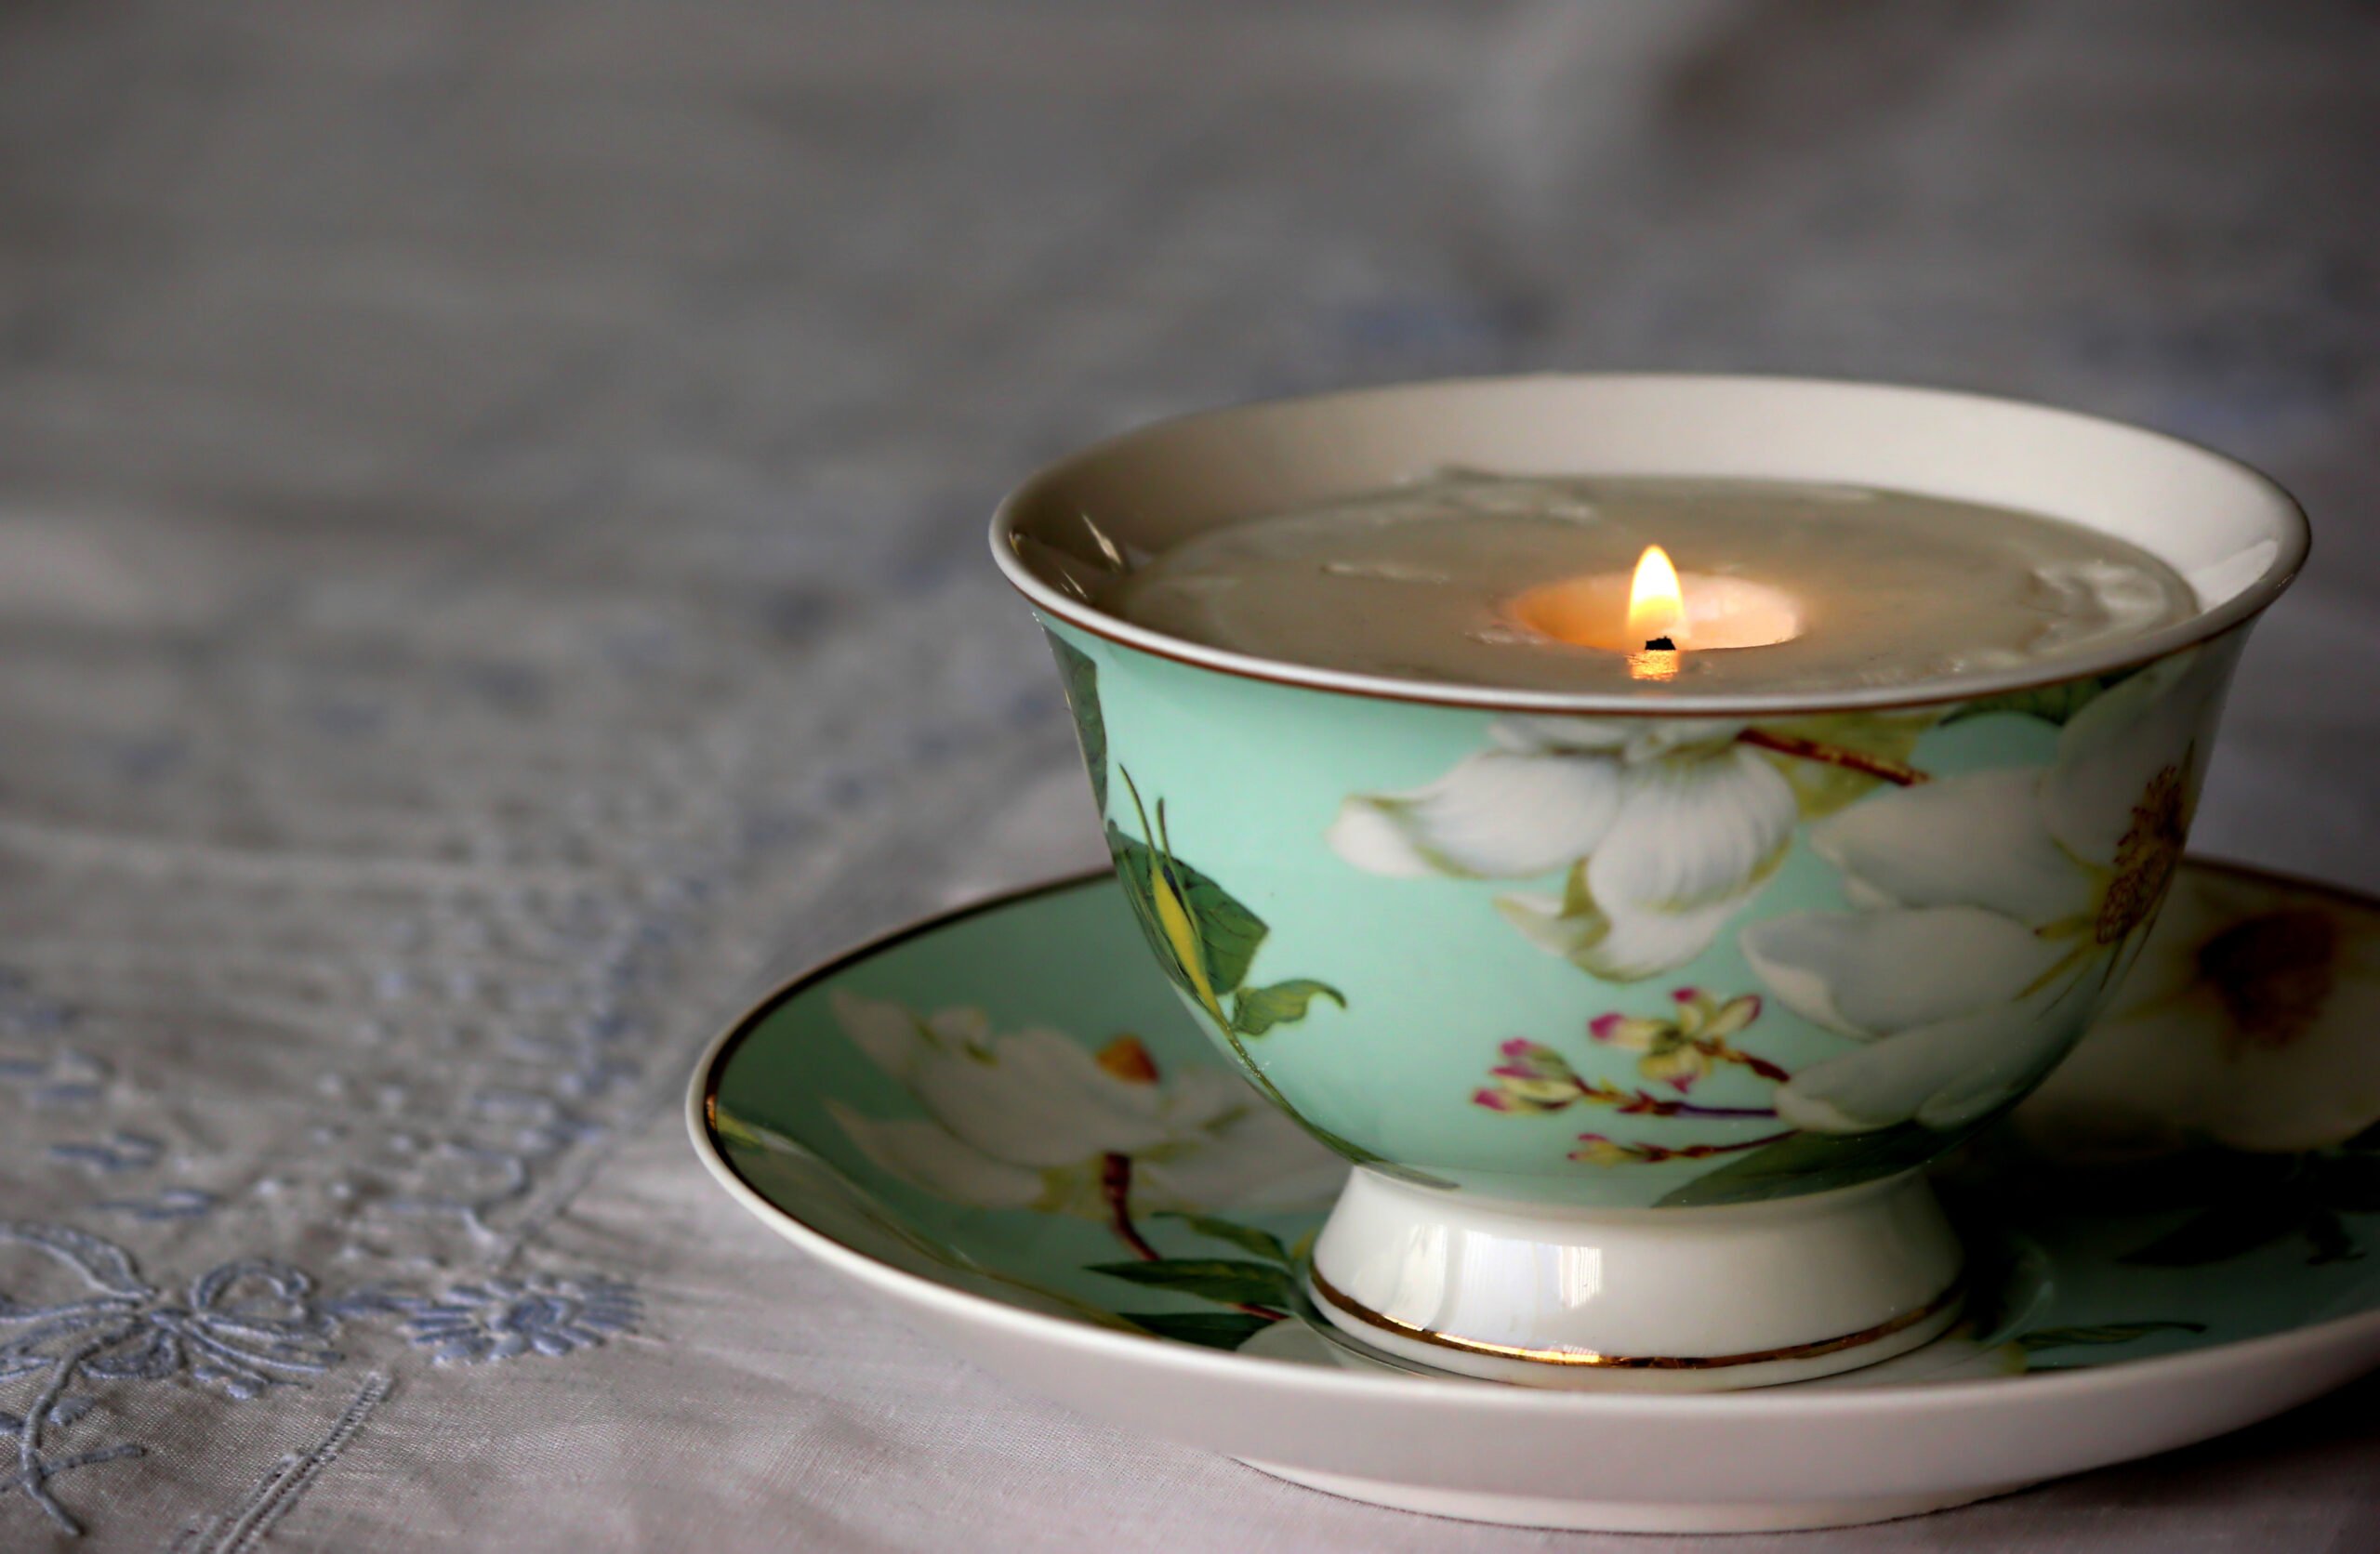 Easy tutorial to make your own candle in a teacup